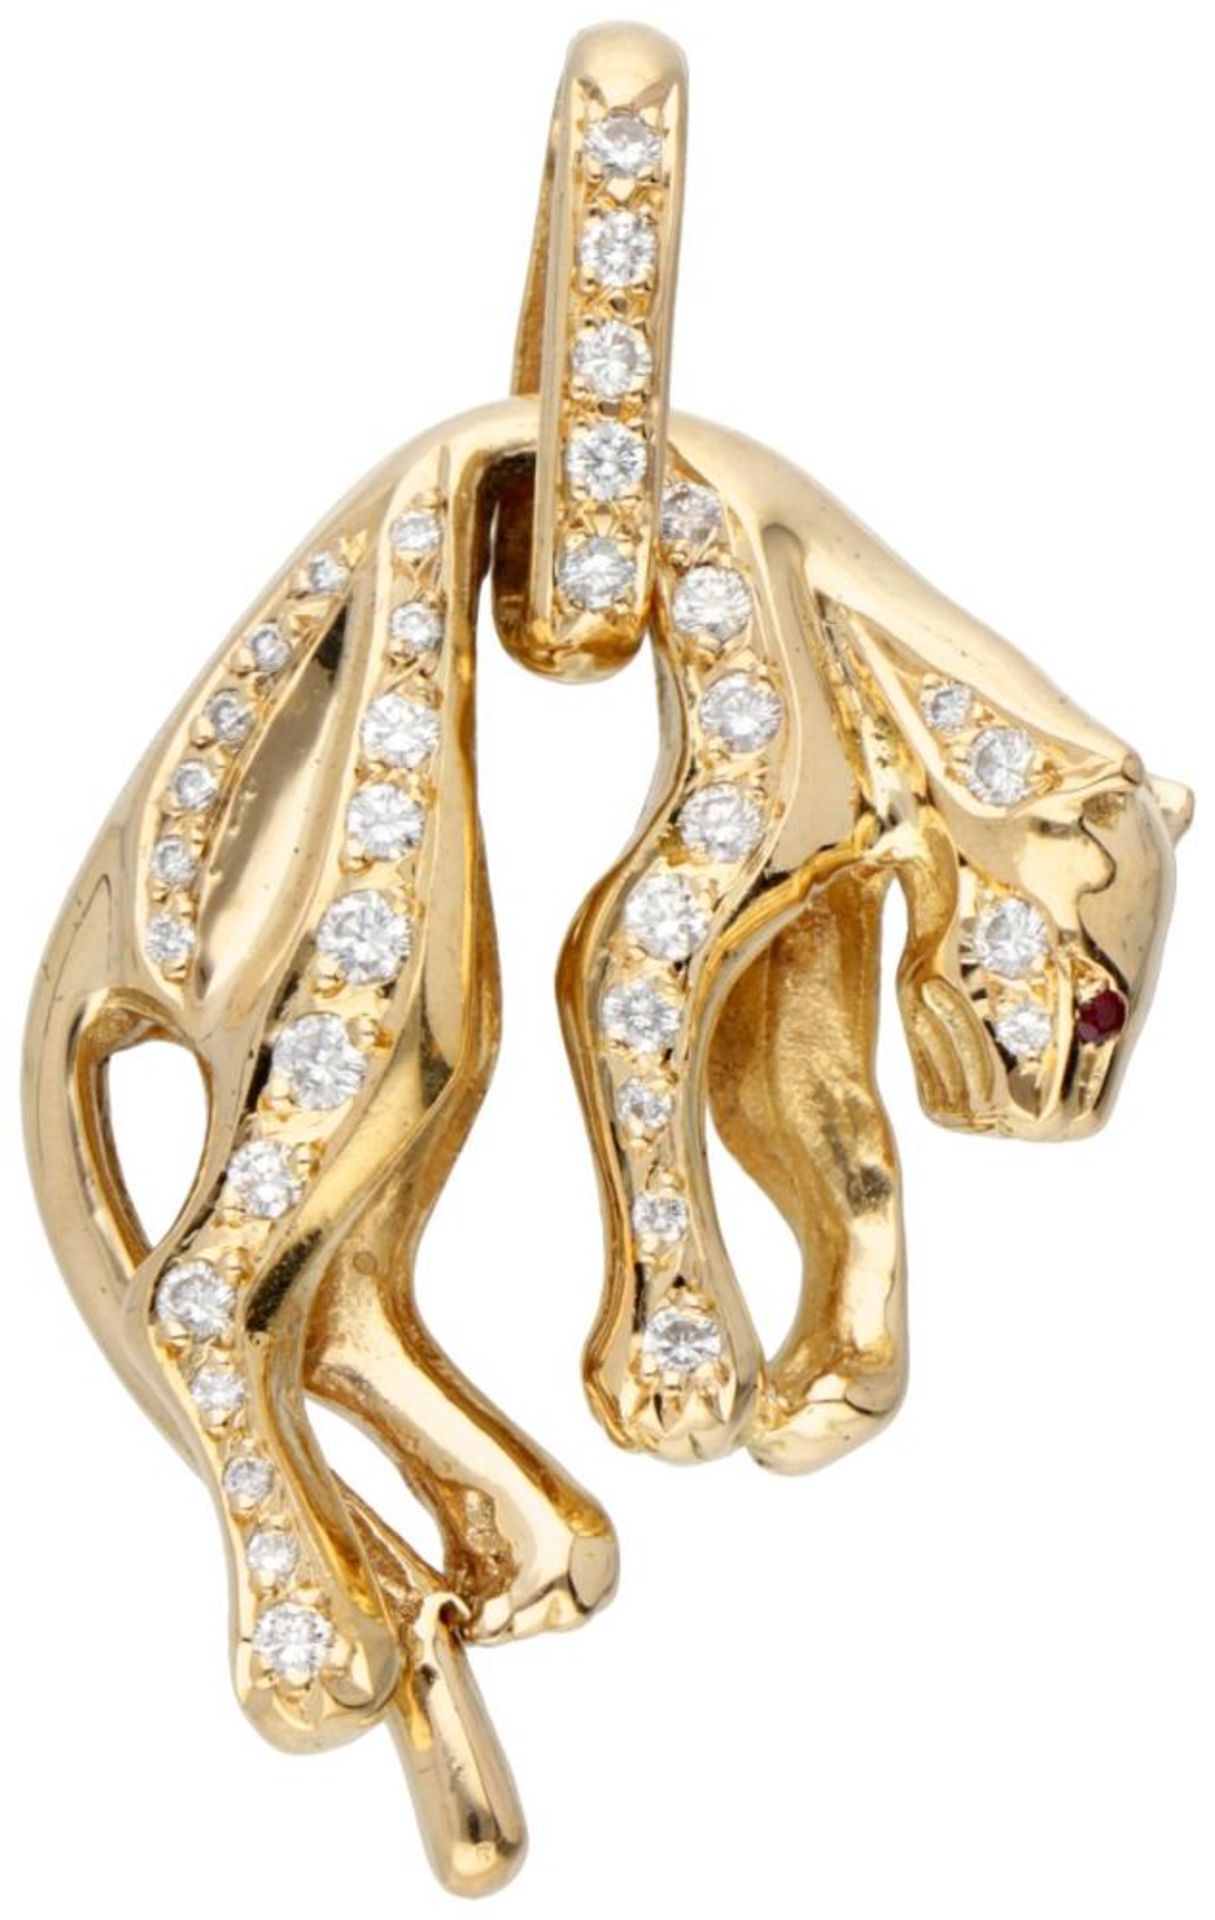 18K. Yellow gold panther pendant set with approx. 0.41 ct. diamond and ruby. - Image 2 of 4